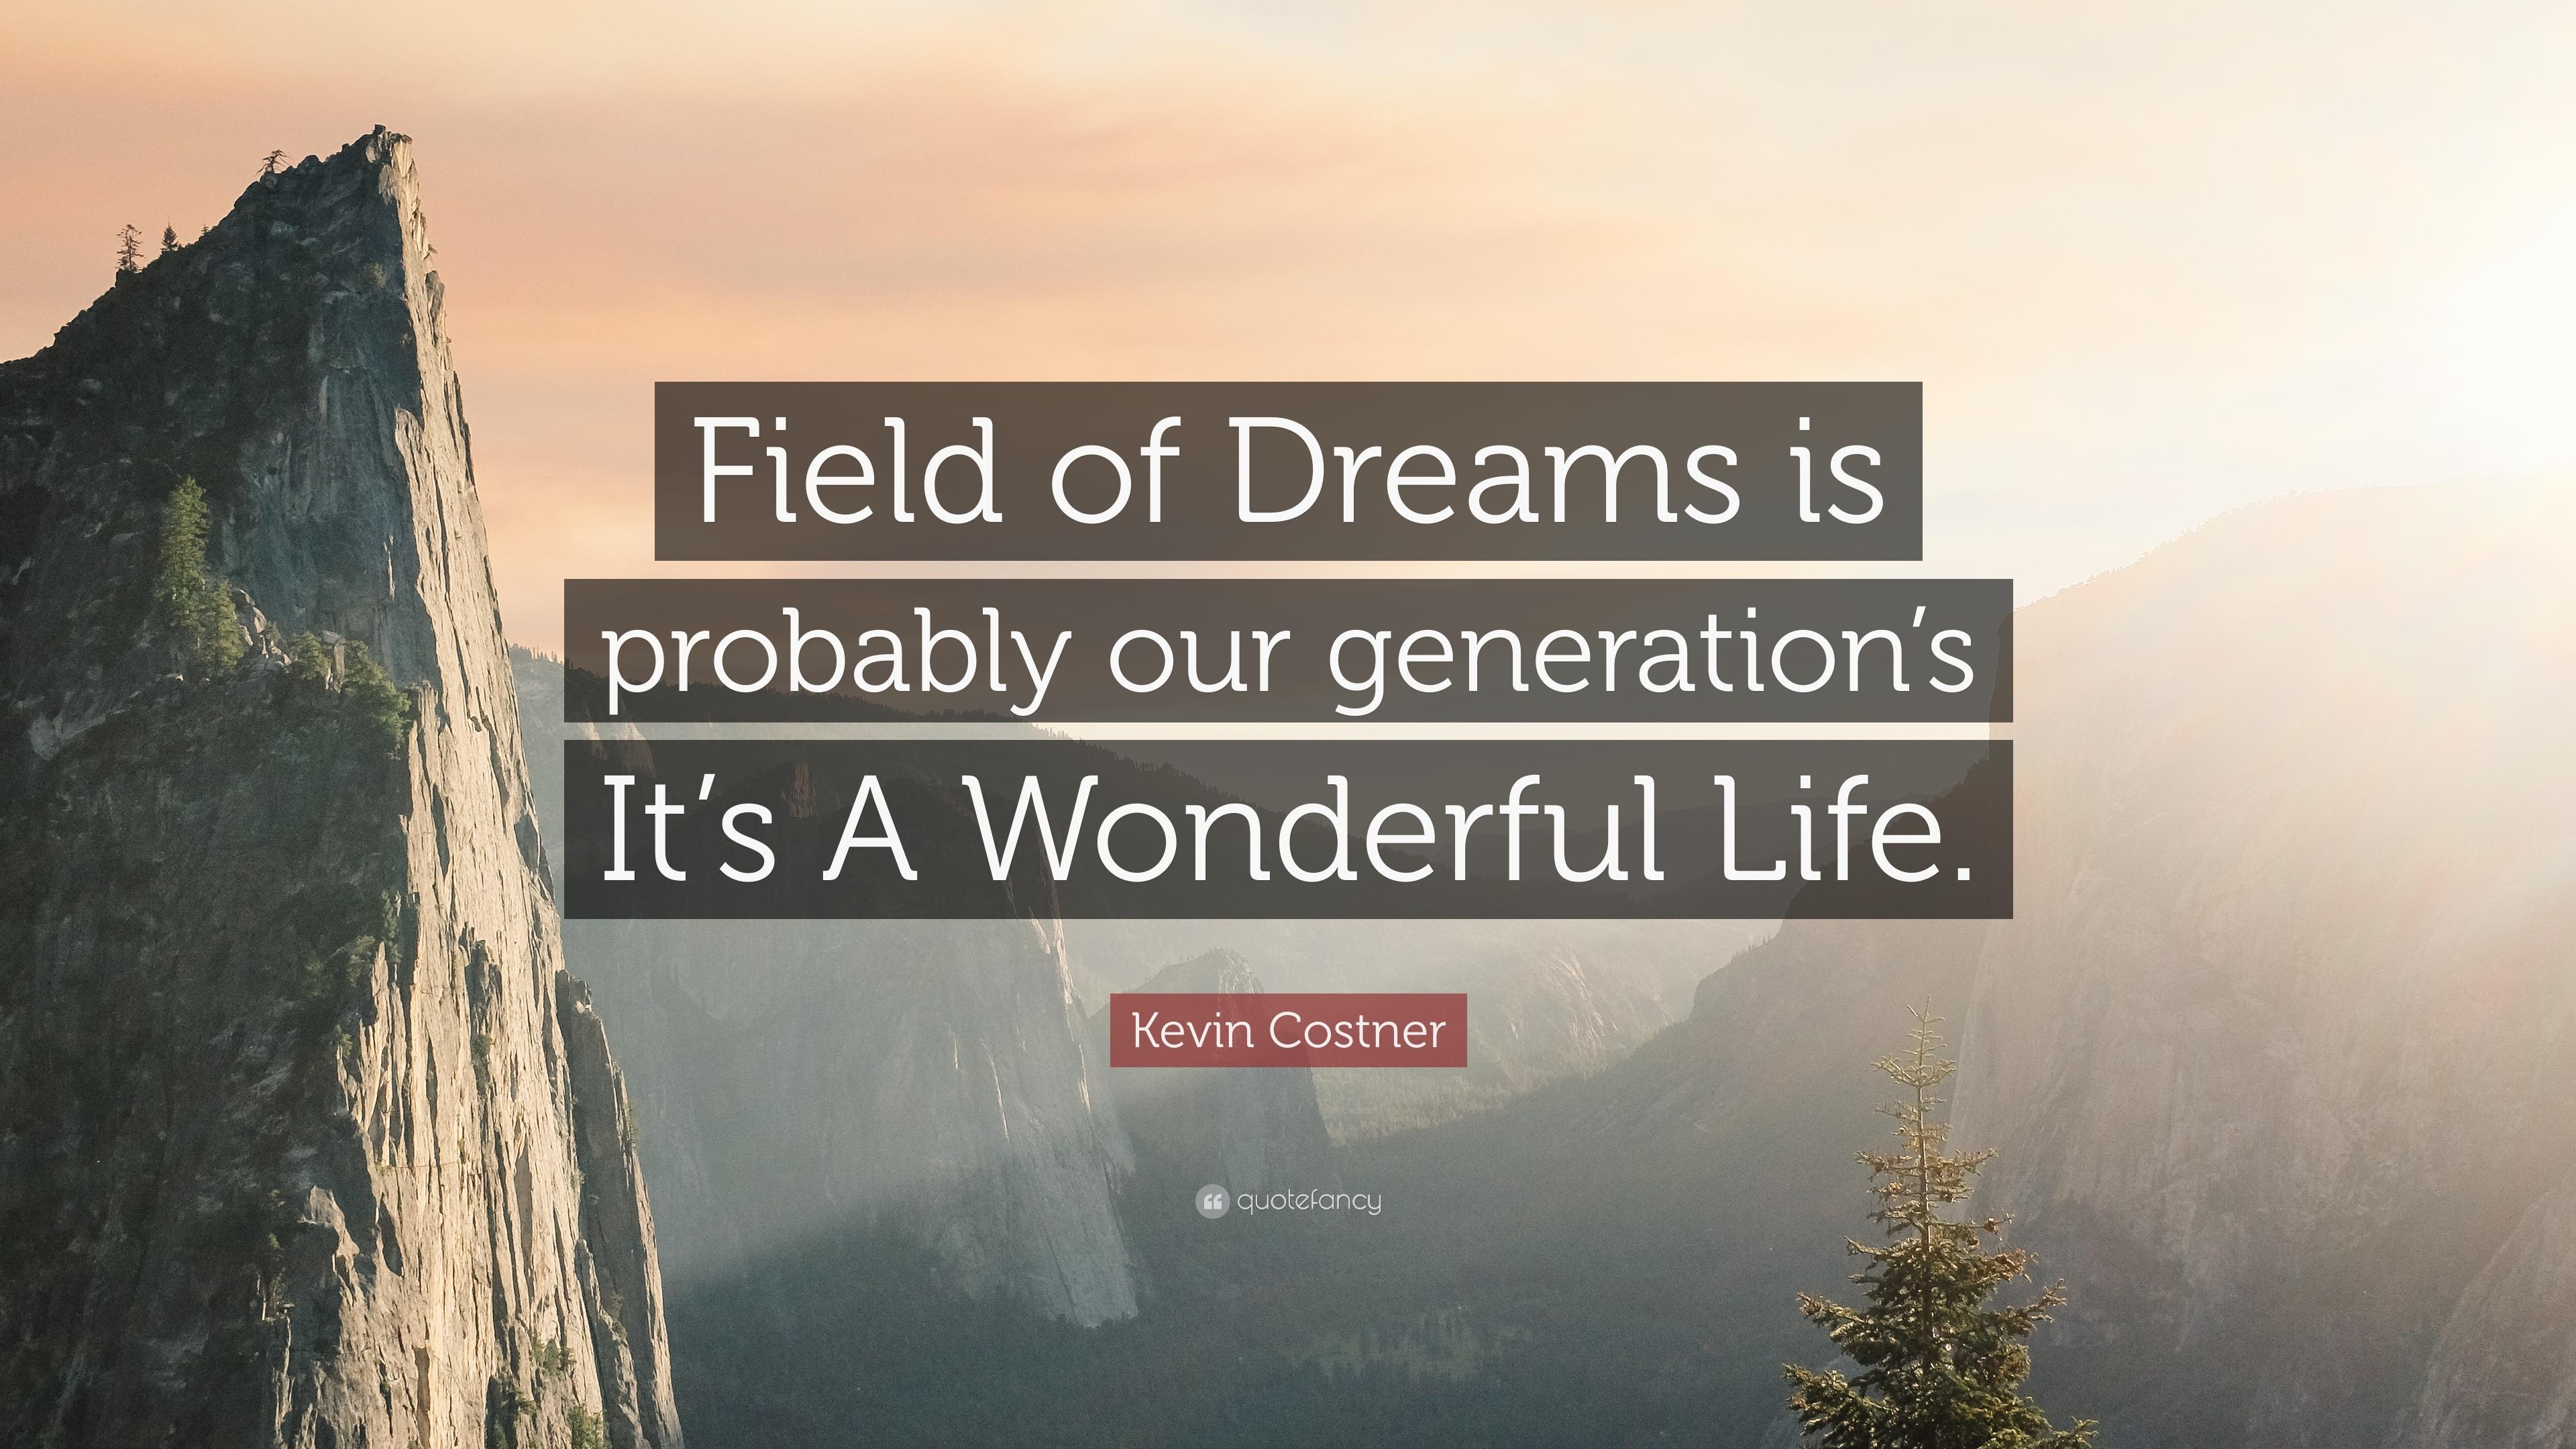 Kevin Costner Quote: “Field of Dreams is probably our generation's